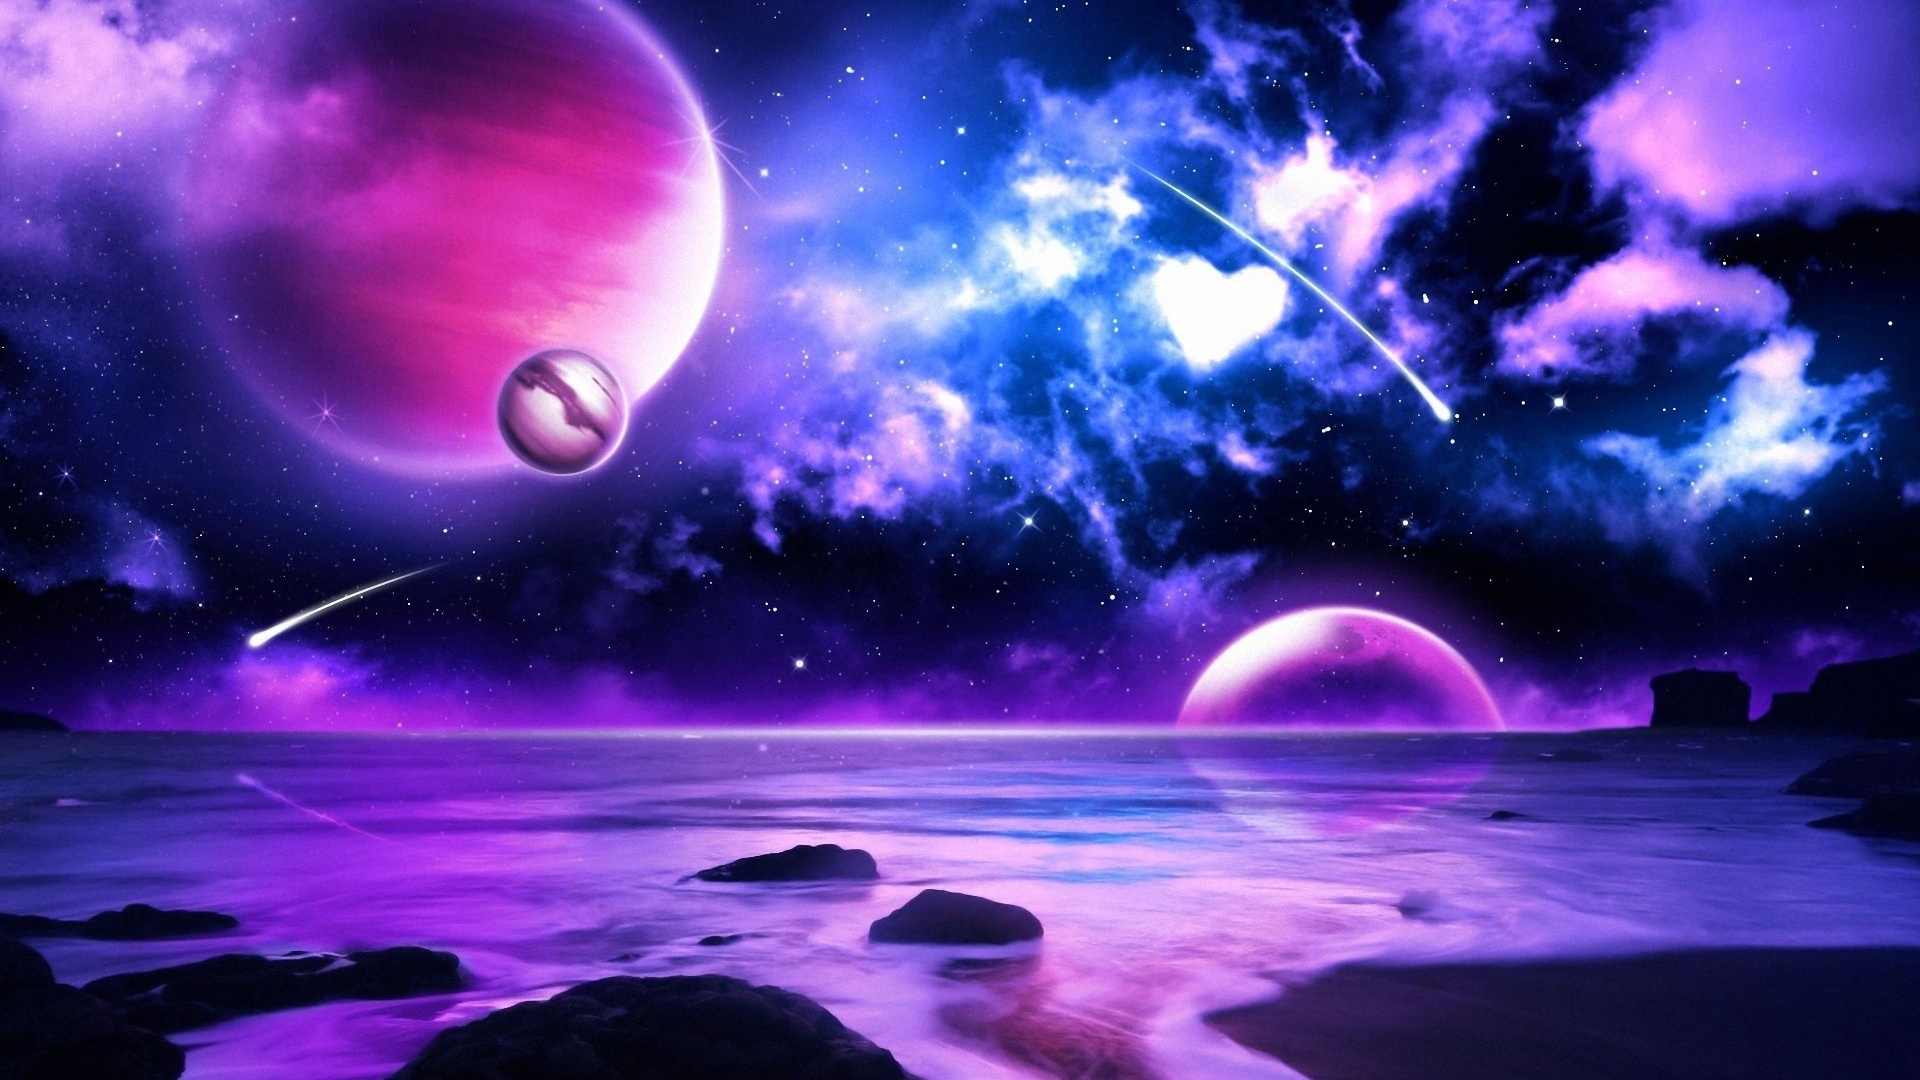 Purple Hd Picture Desktop Wallpapers High Definition - Purple Galaxy With Planets - HD Wallpaper 